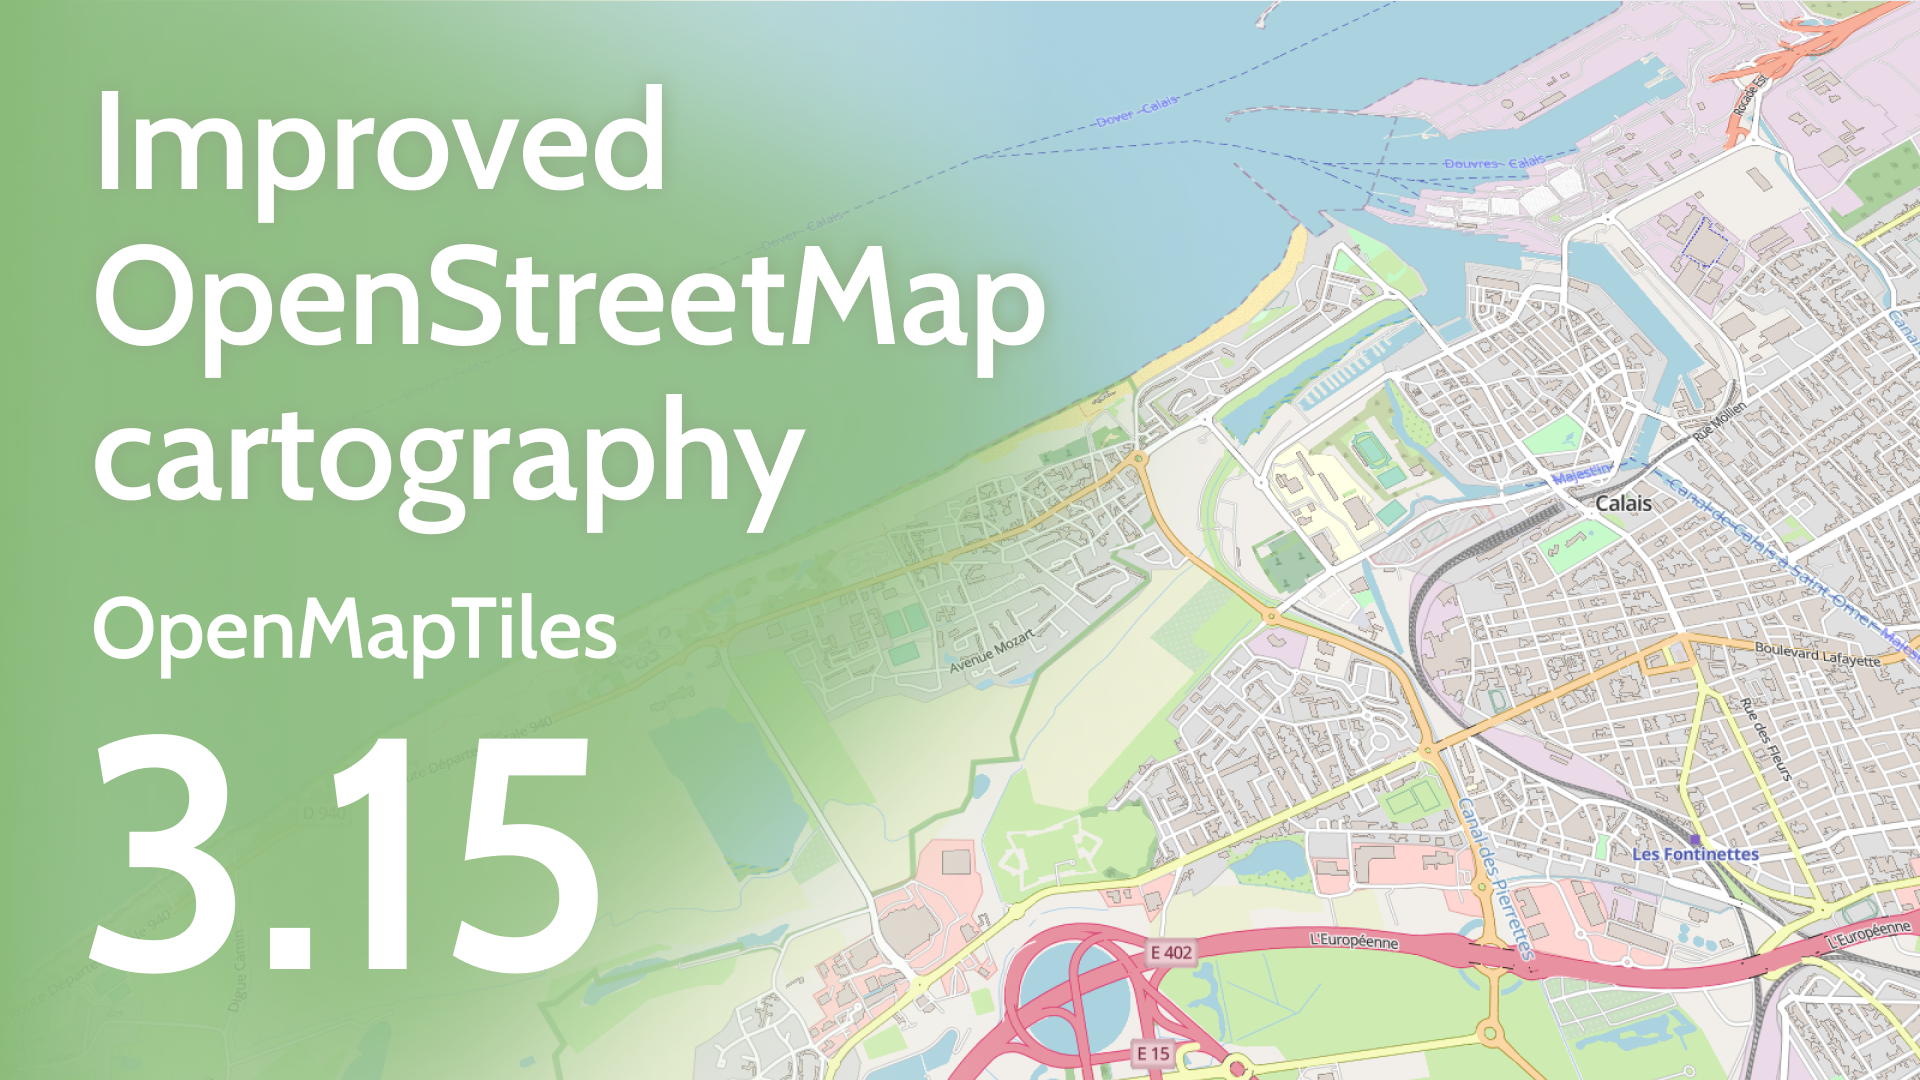 Improved OpenStreetMap cartography in OpenMapTiles 3.15